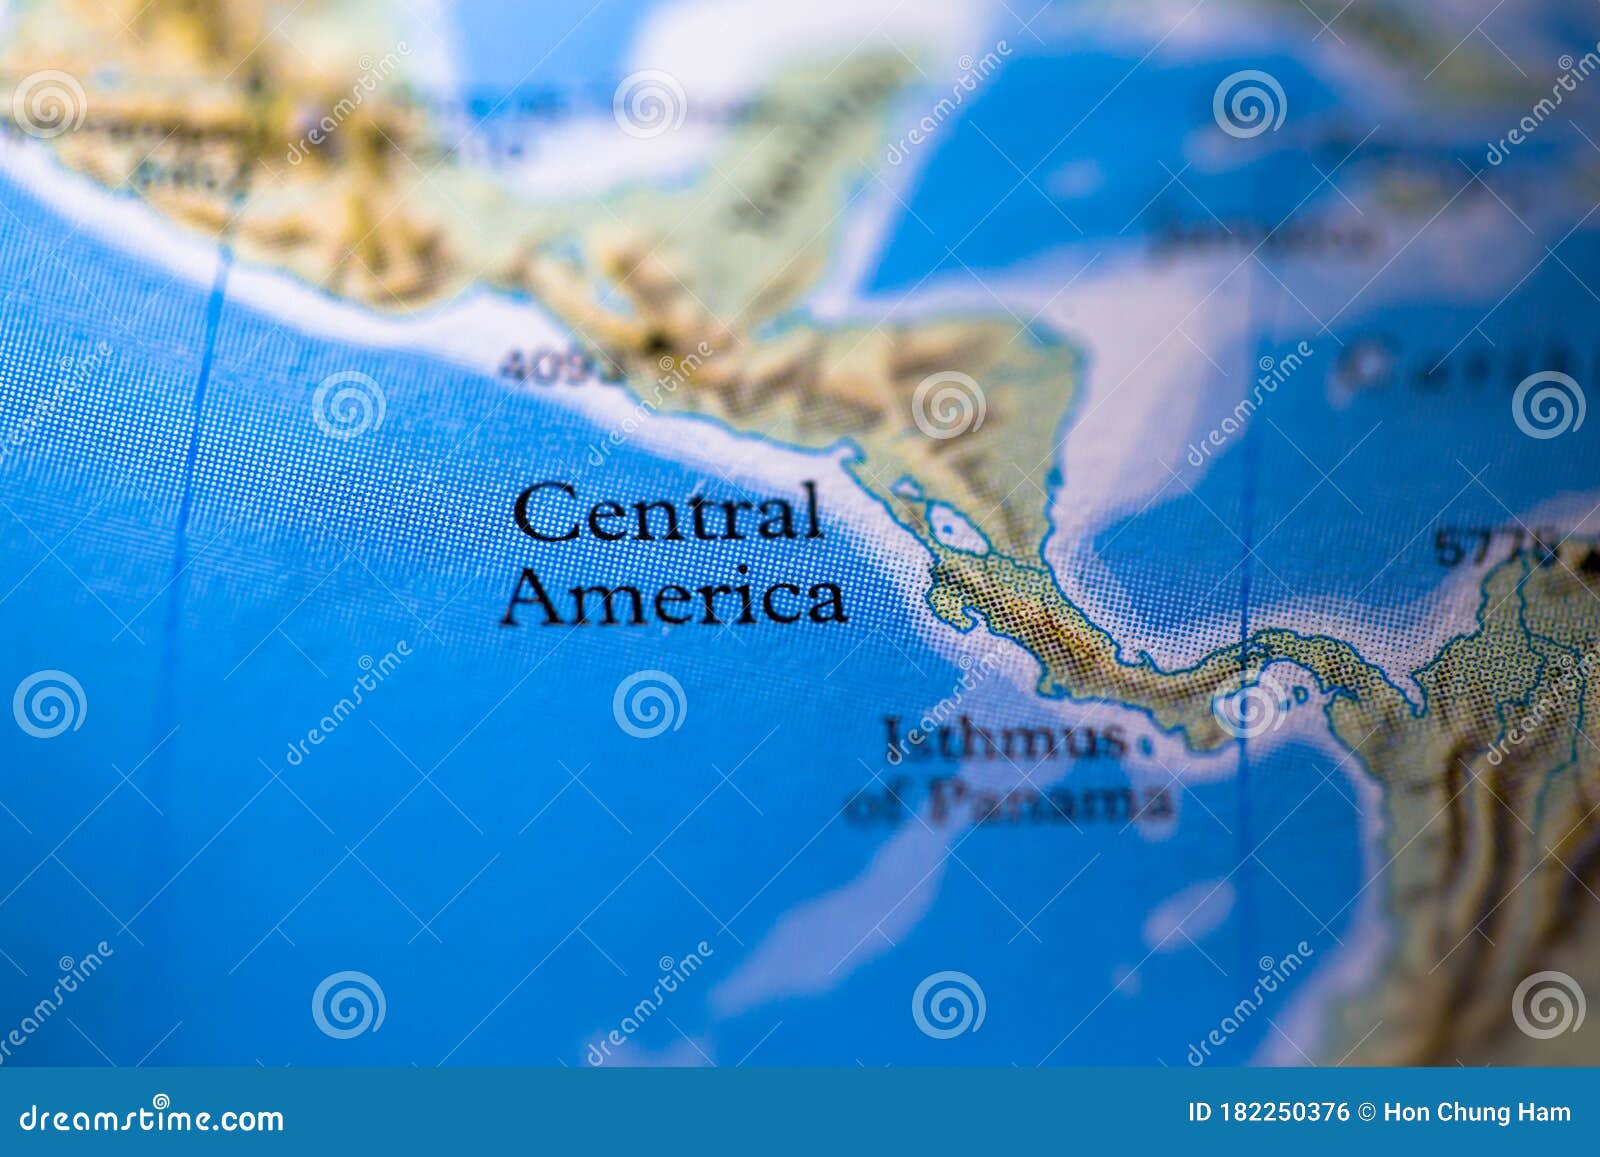 geographical map location of central america region in america continent on atlas